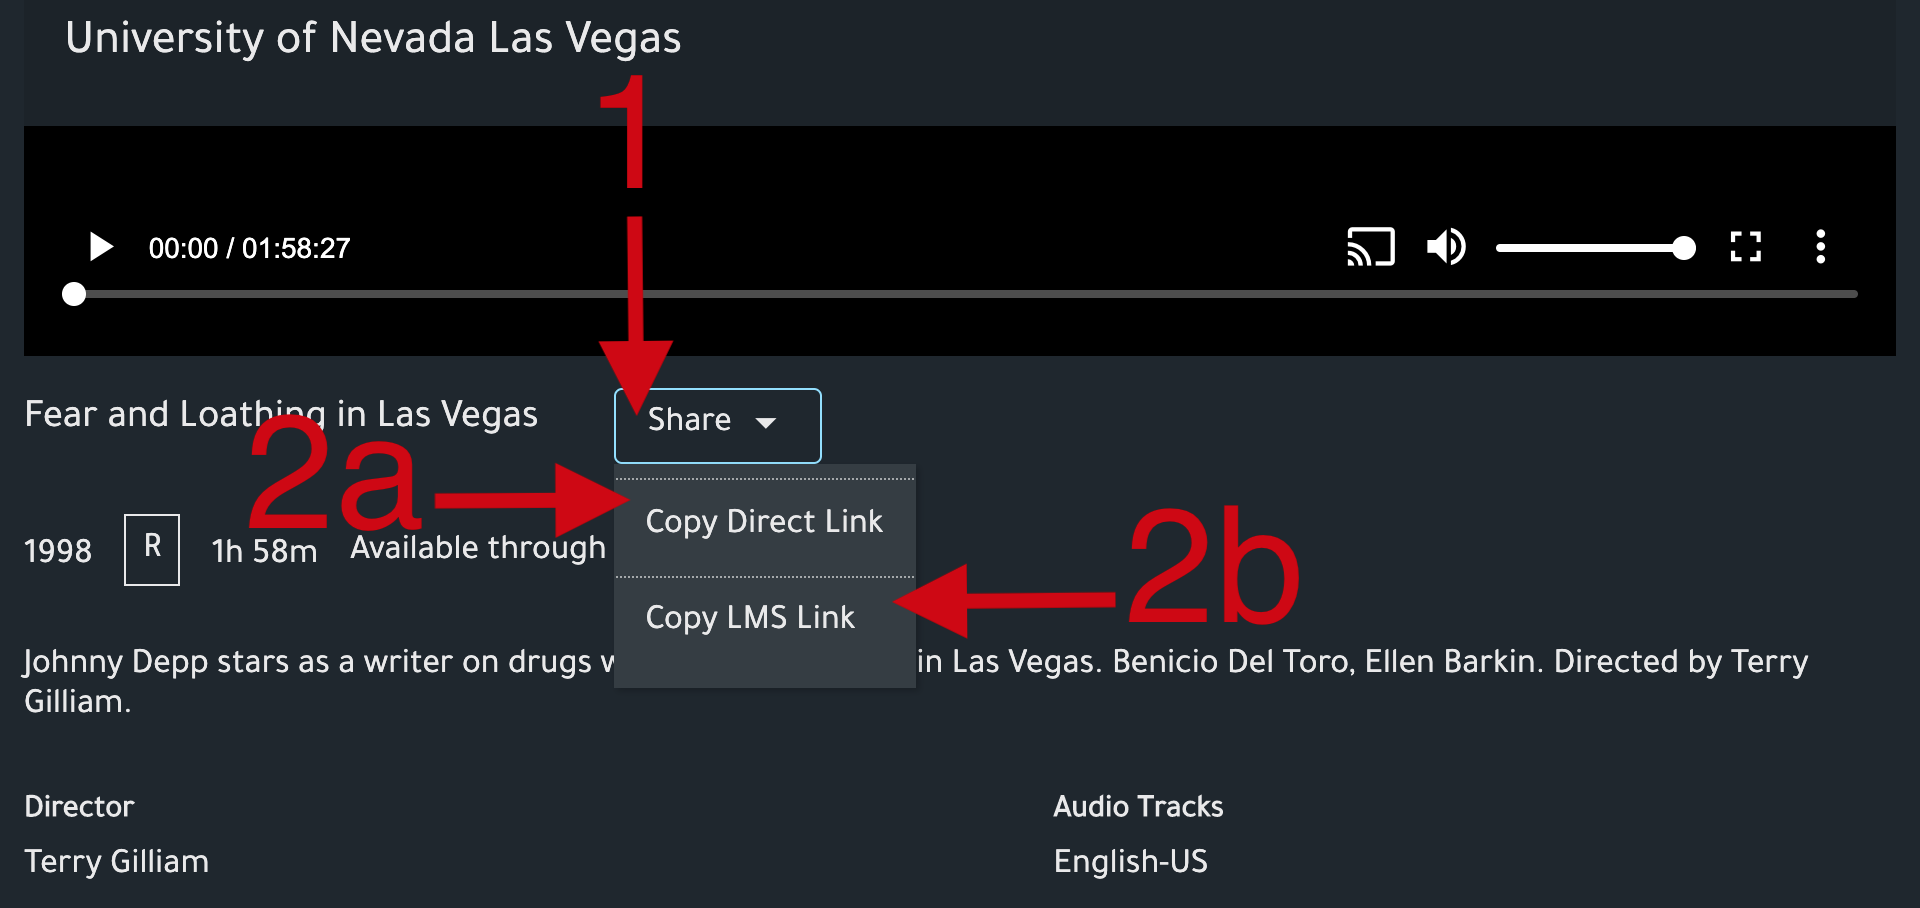 Screenshot of Swank Digital Campus showing where to find the share button